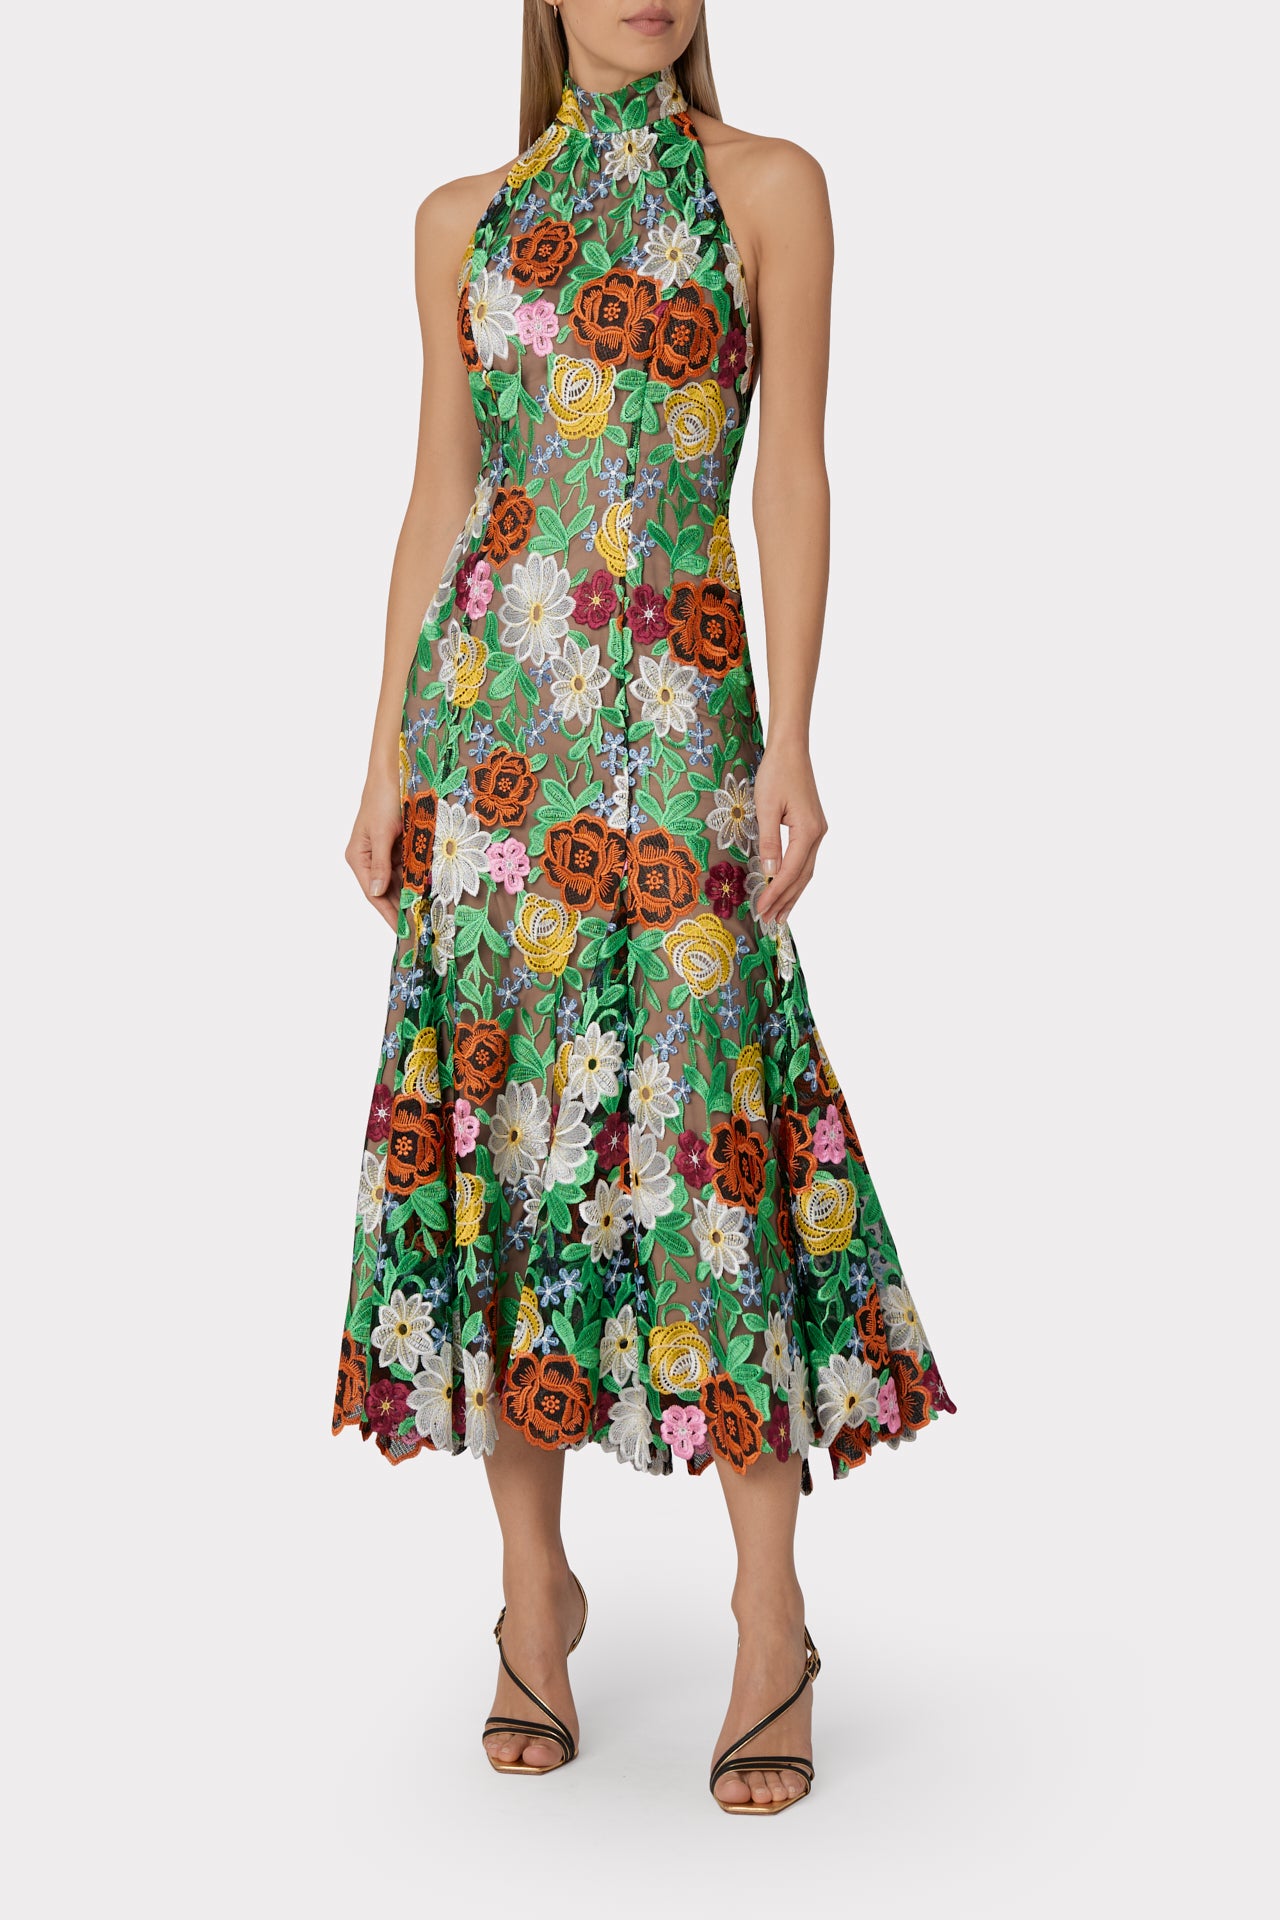 Penelope Embroidered Floral Dress in ...